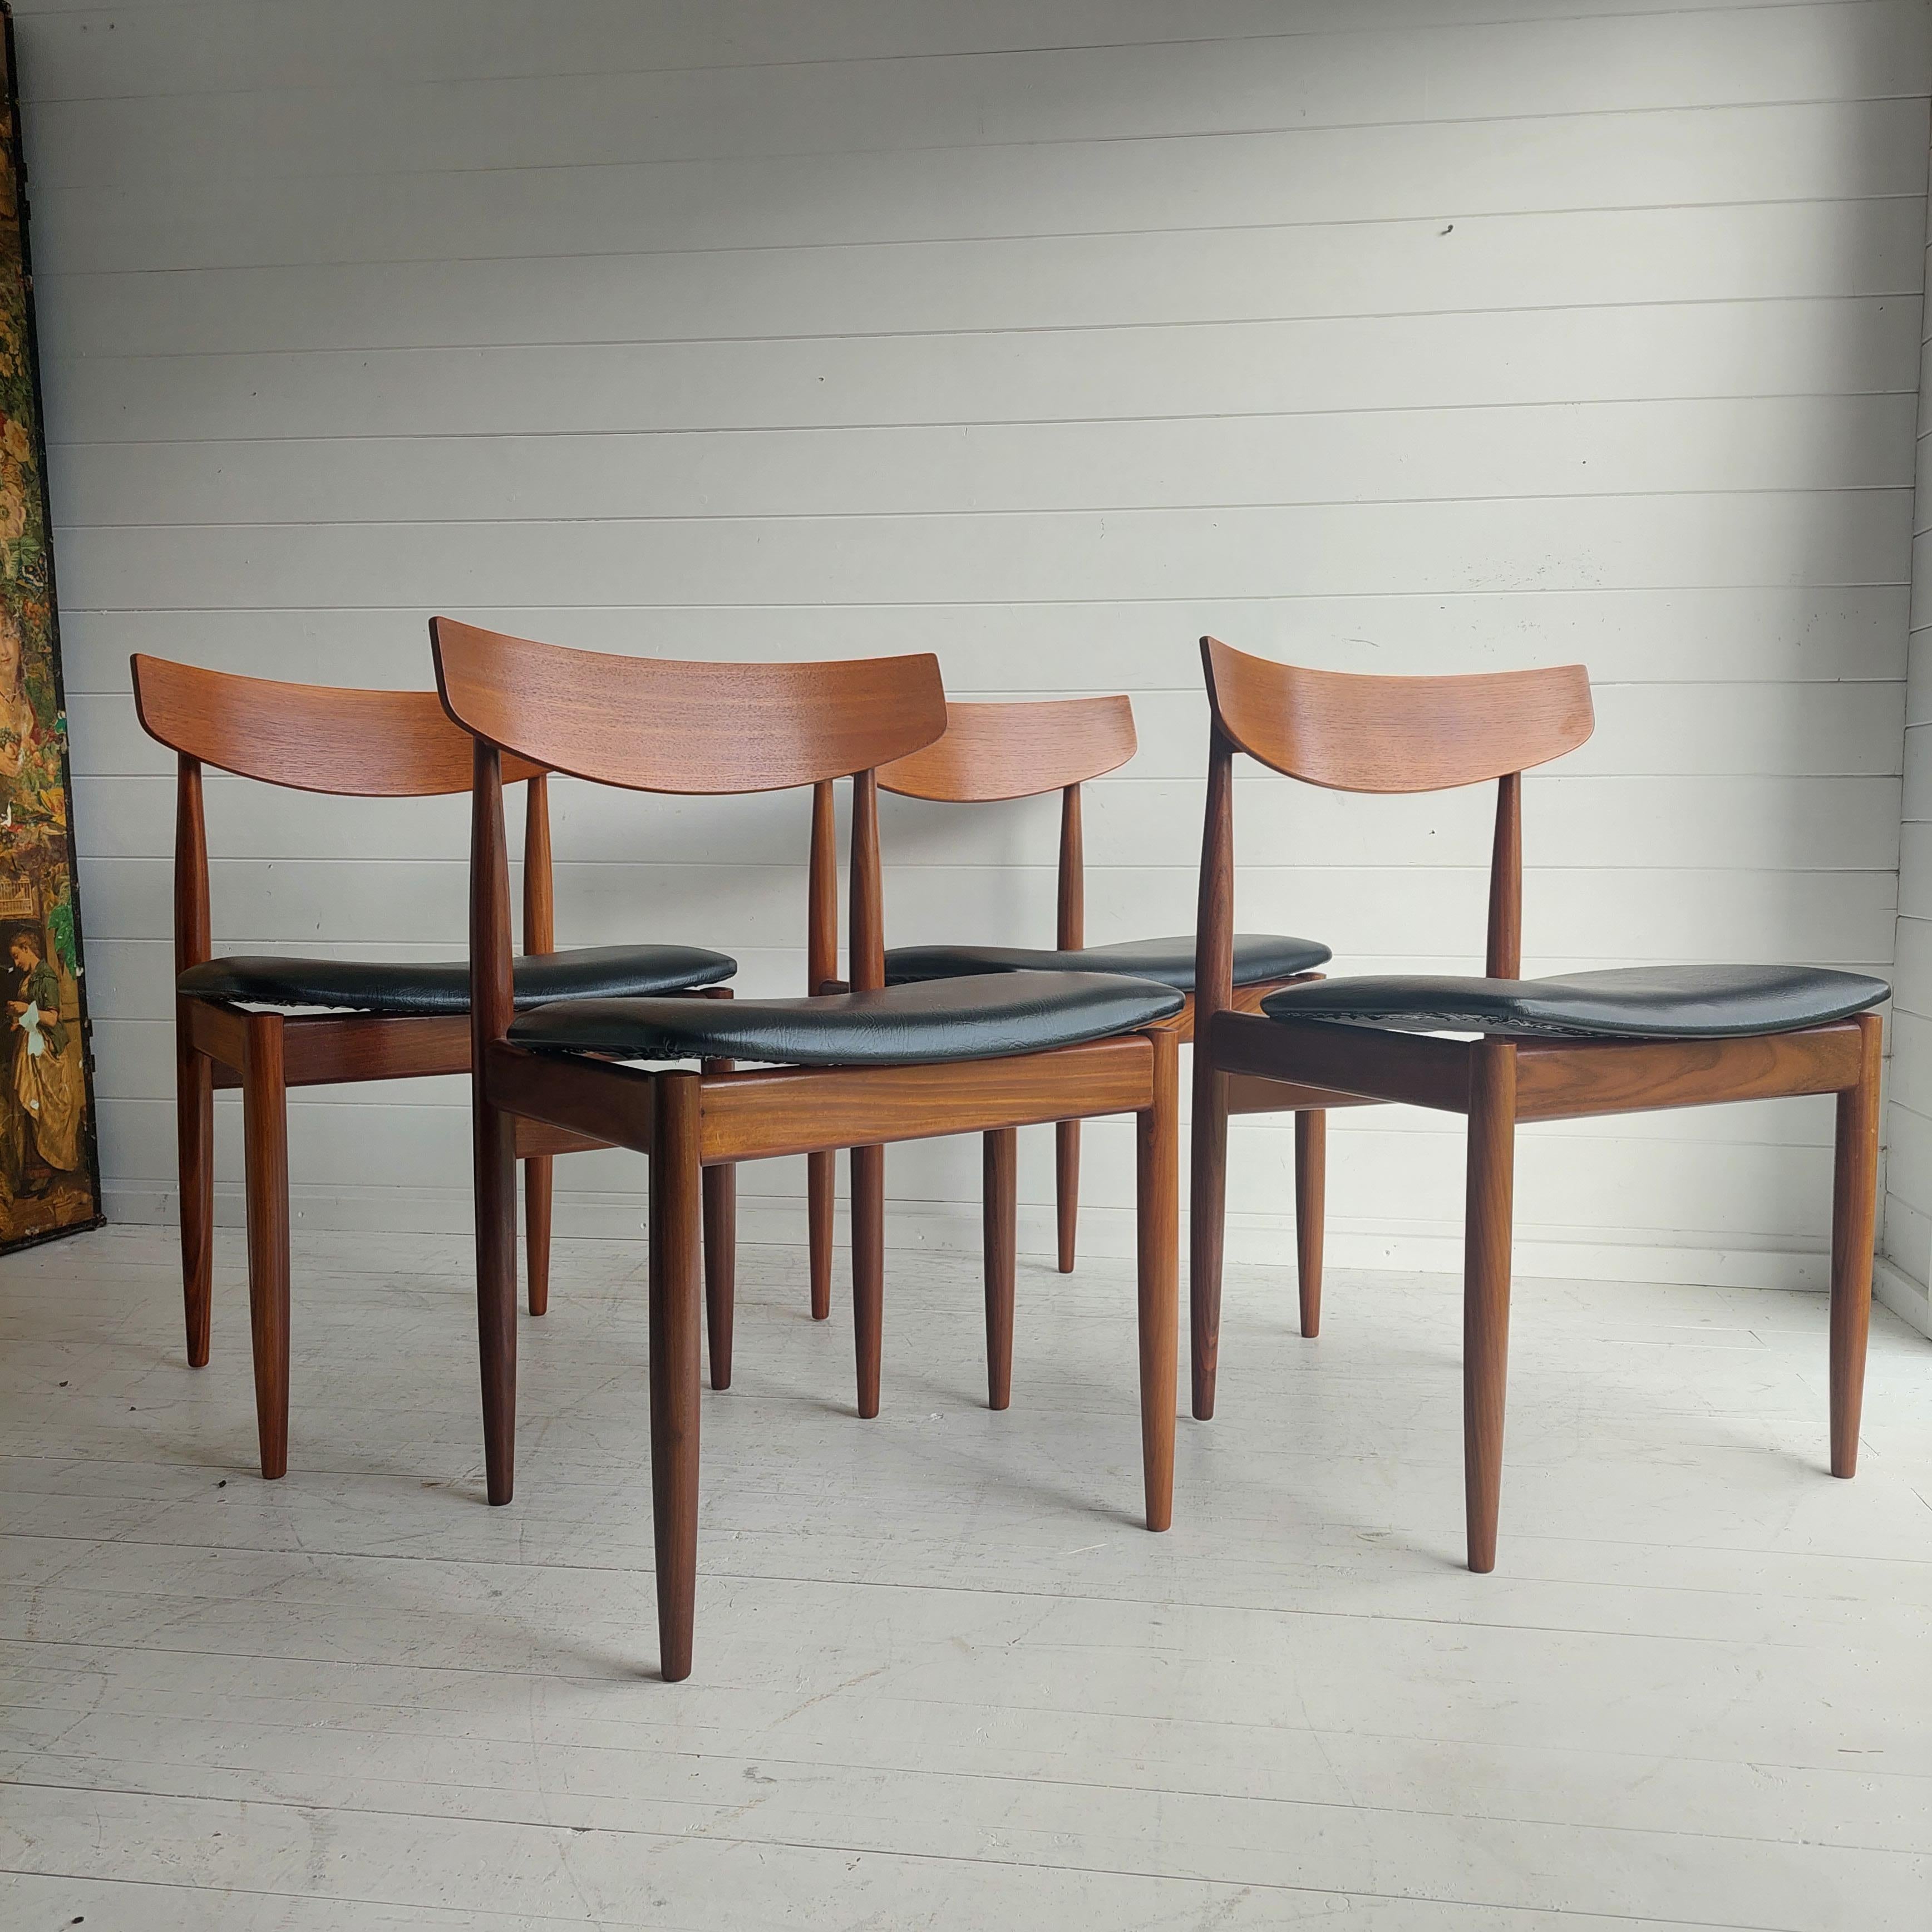 A beautifully designed & crafted set of 4 teak dining chairs designed by the Danish designer Ib Kofod Larsen as part of the Danish range for G-Plan in the 1960s.
The chairs all have the highly curved back support which is a Design feature that